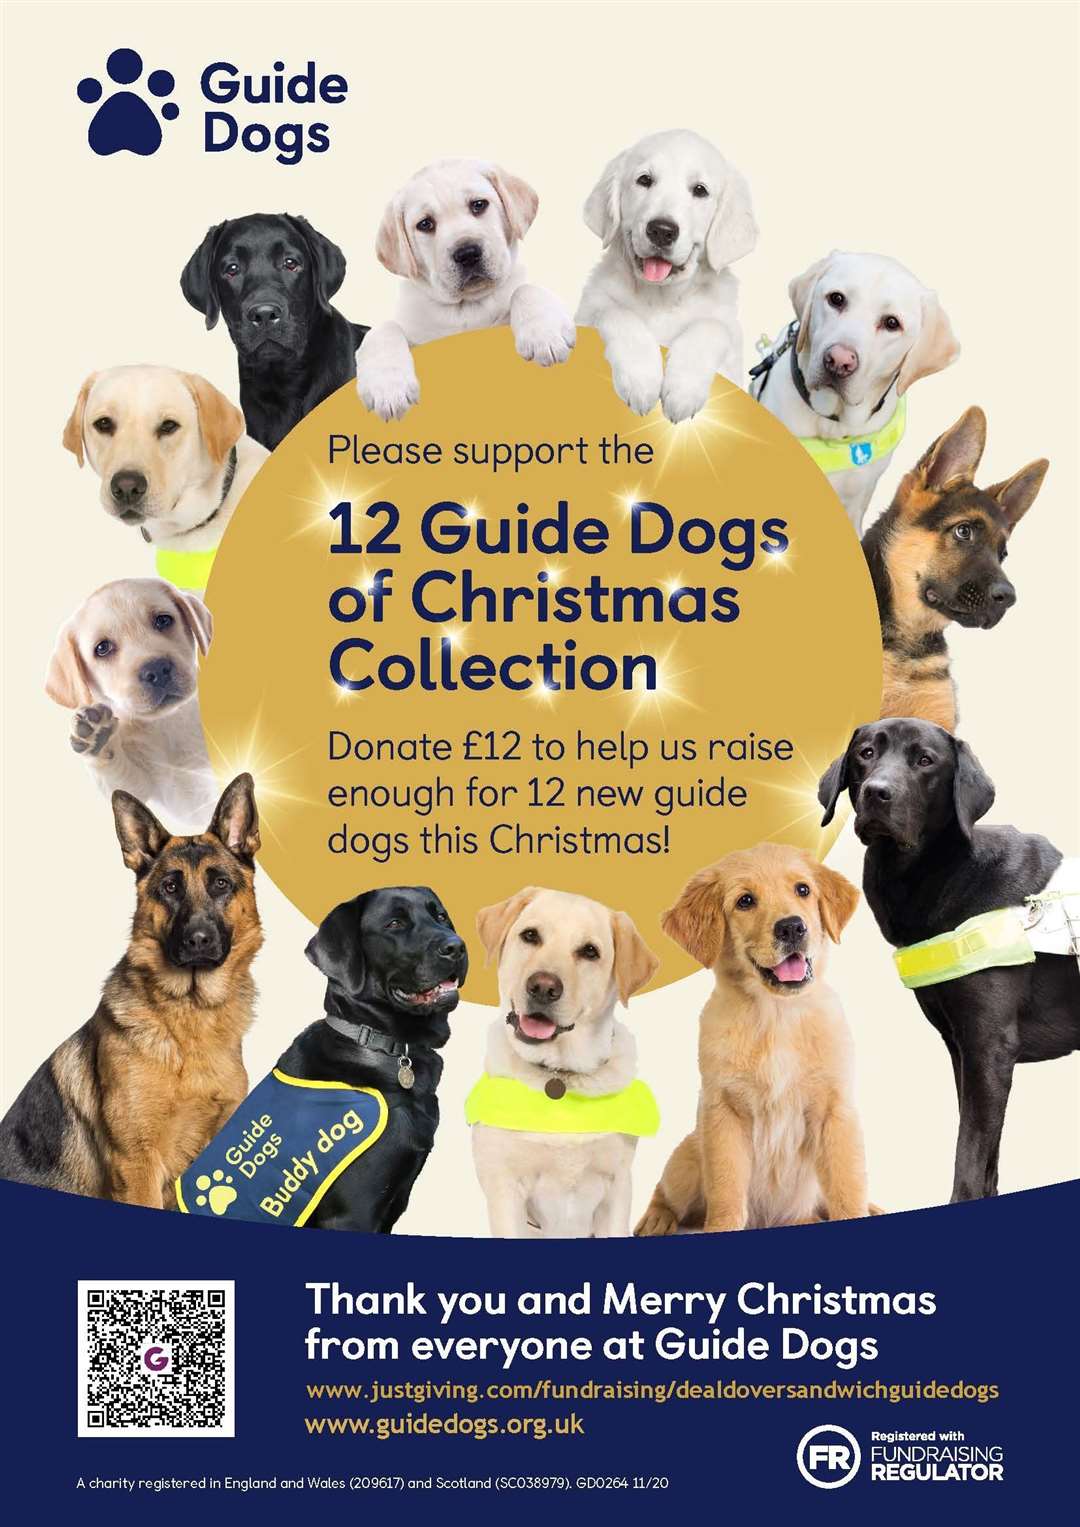 The 12 Guide Dogs of Christmas campaign is running now